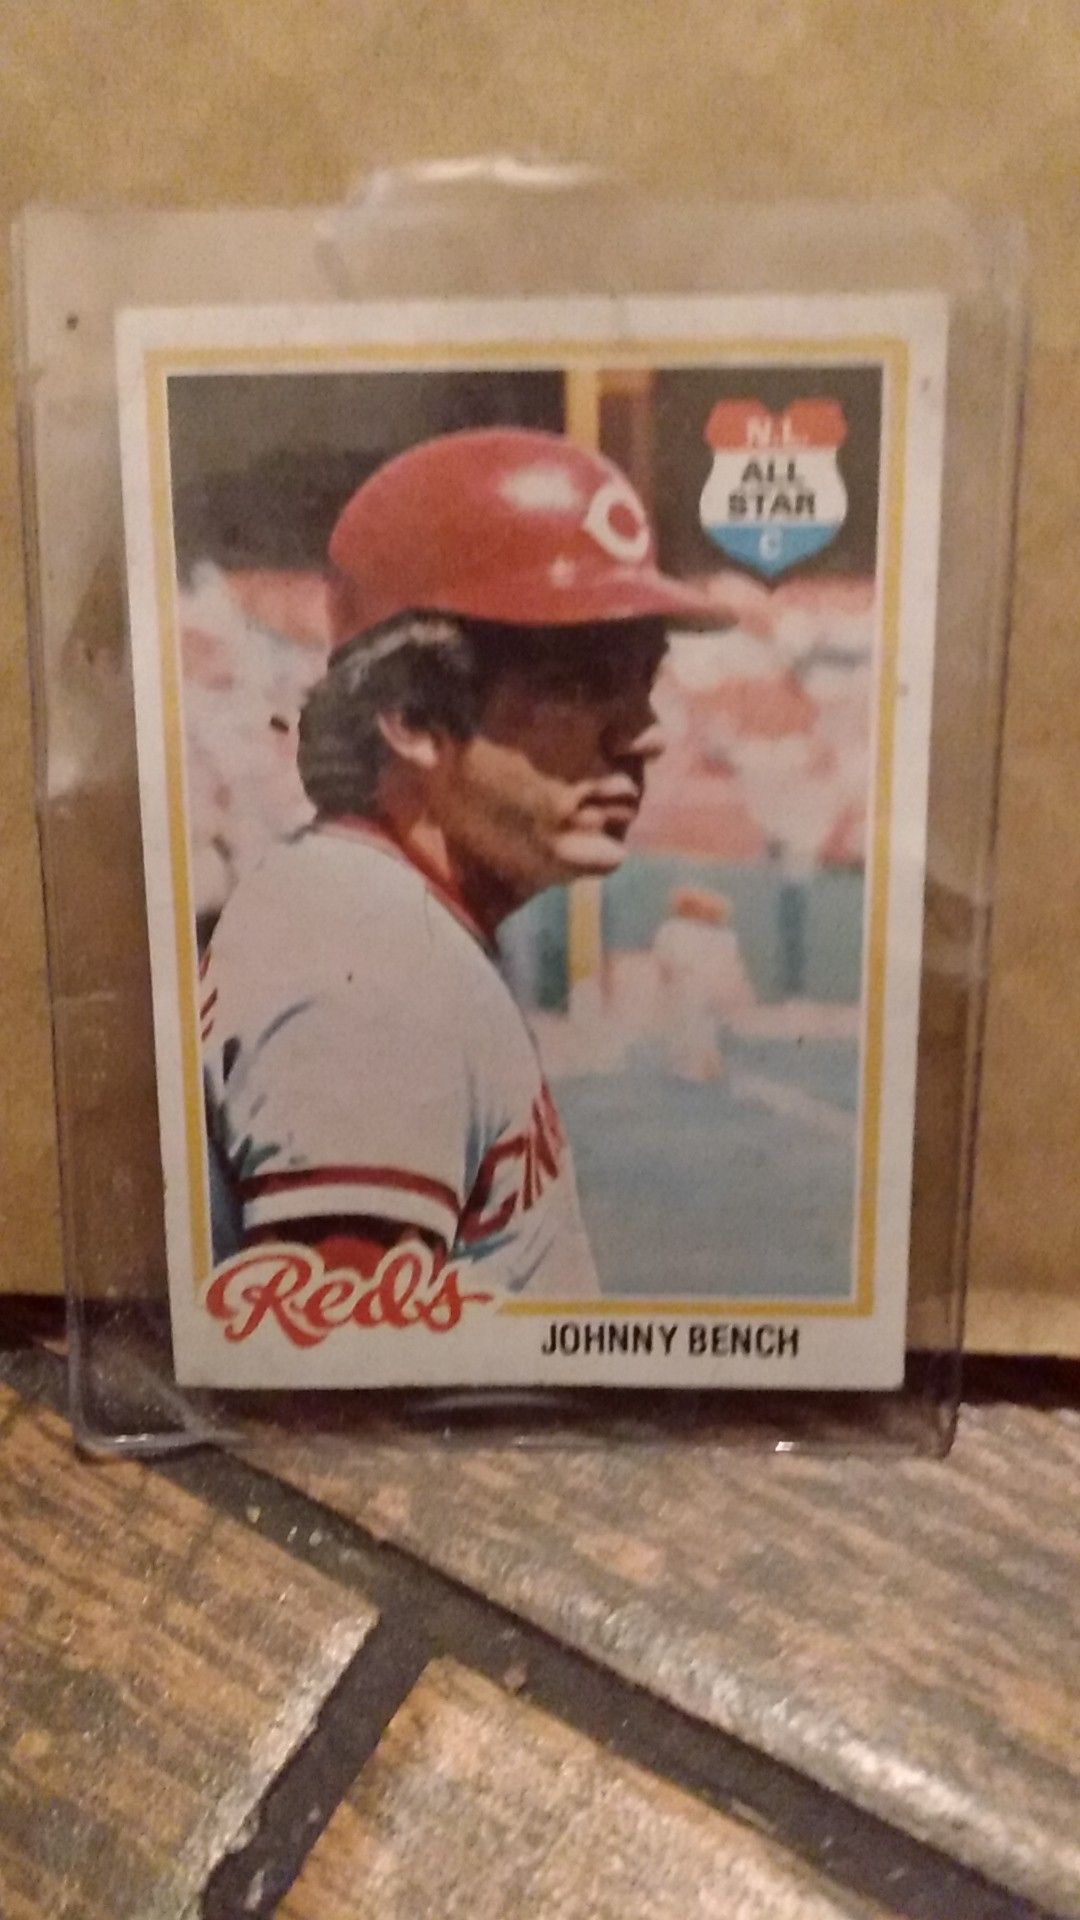 JOHNNY BENCH All - Star card